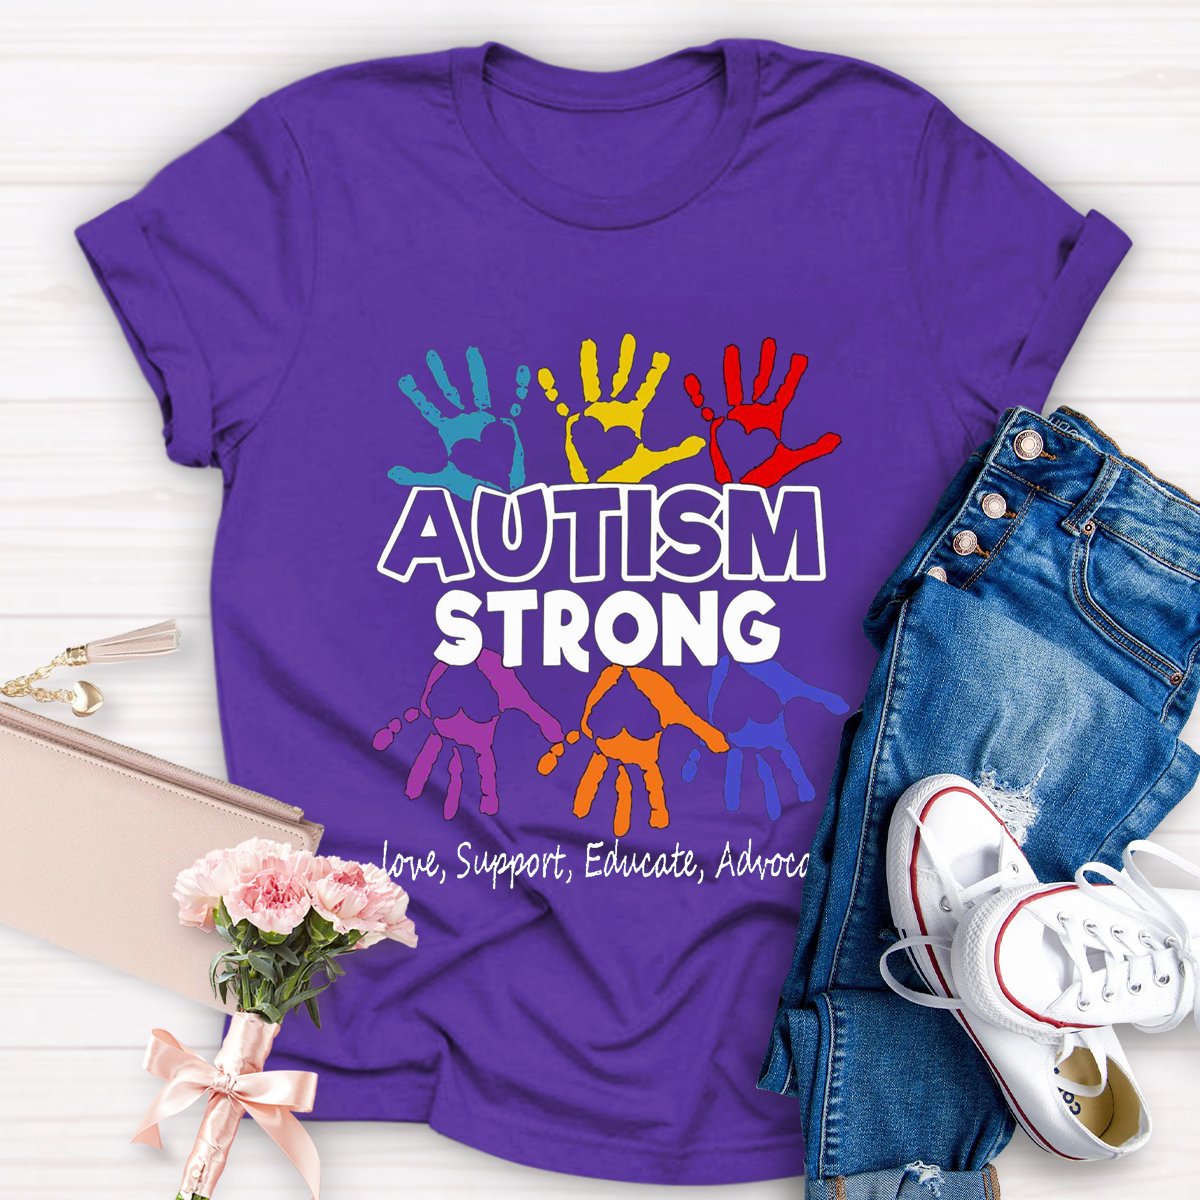 Autism Strong Love Support Educate Advocate Teacher Shirt